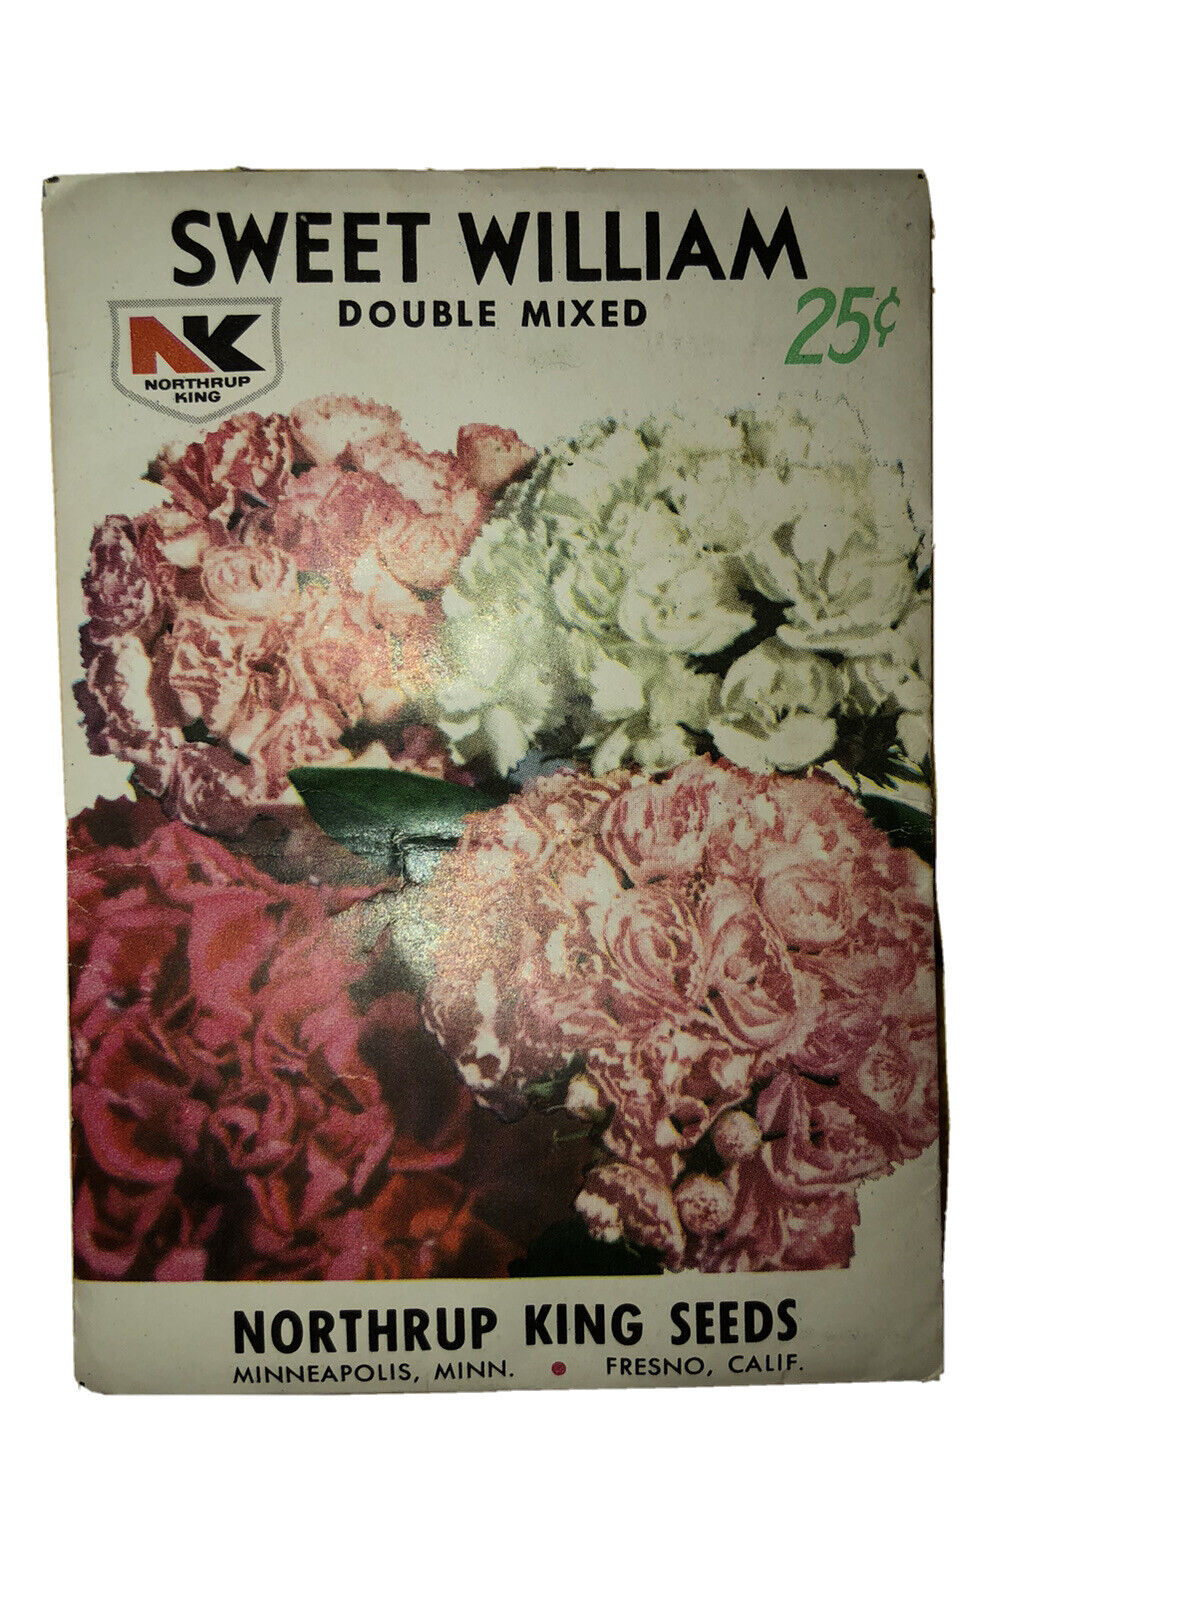 *Sealed* 1964 Northrup, King & Co. Sweet William Seed Growers Seeds Pack *Full